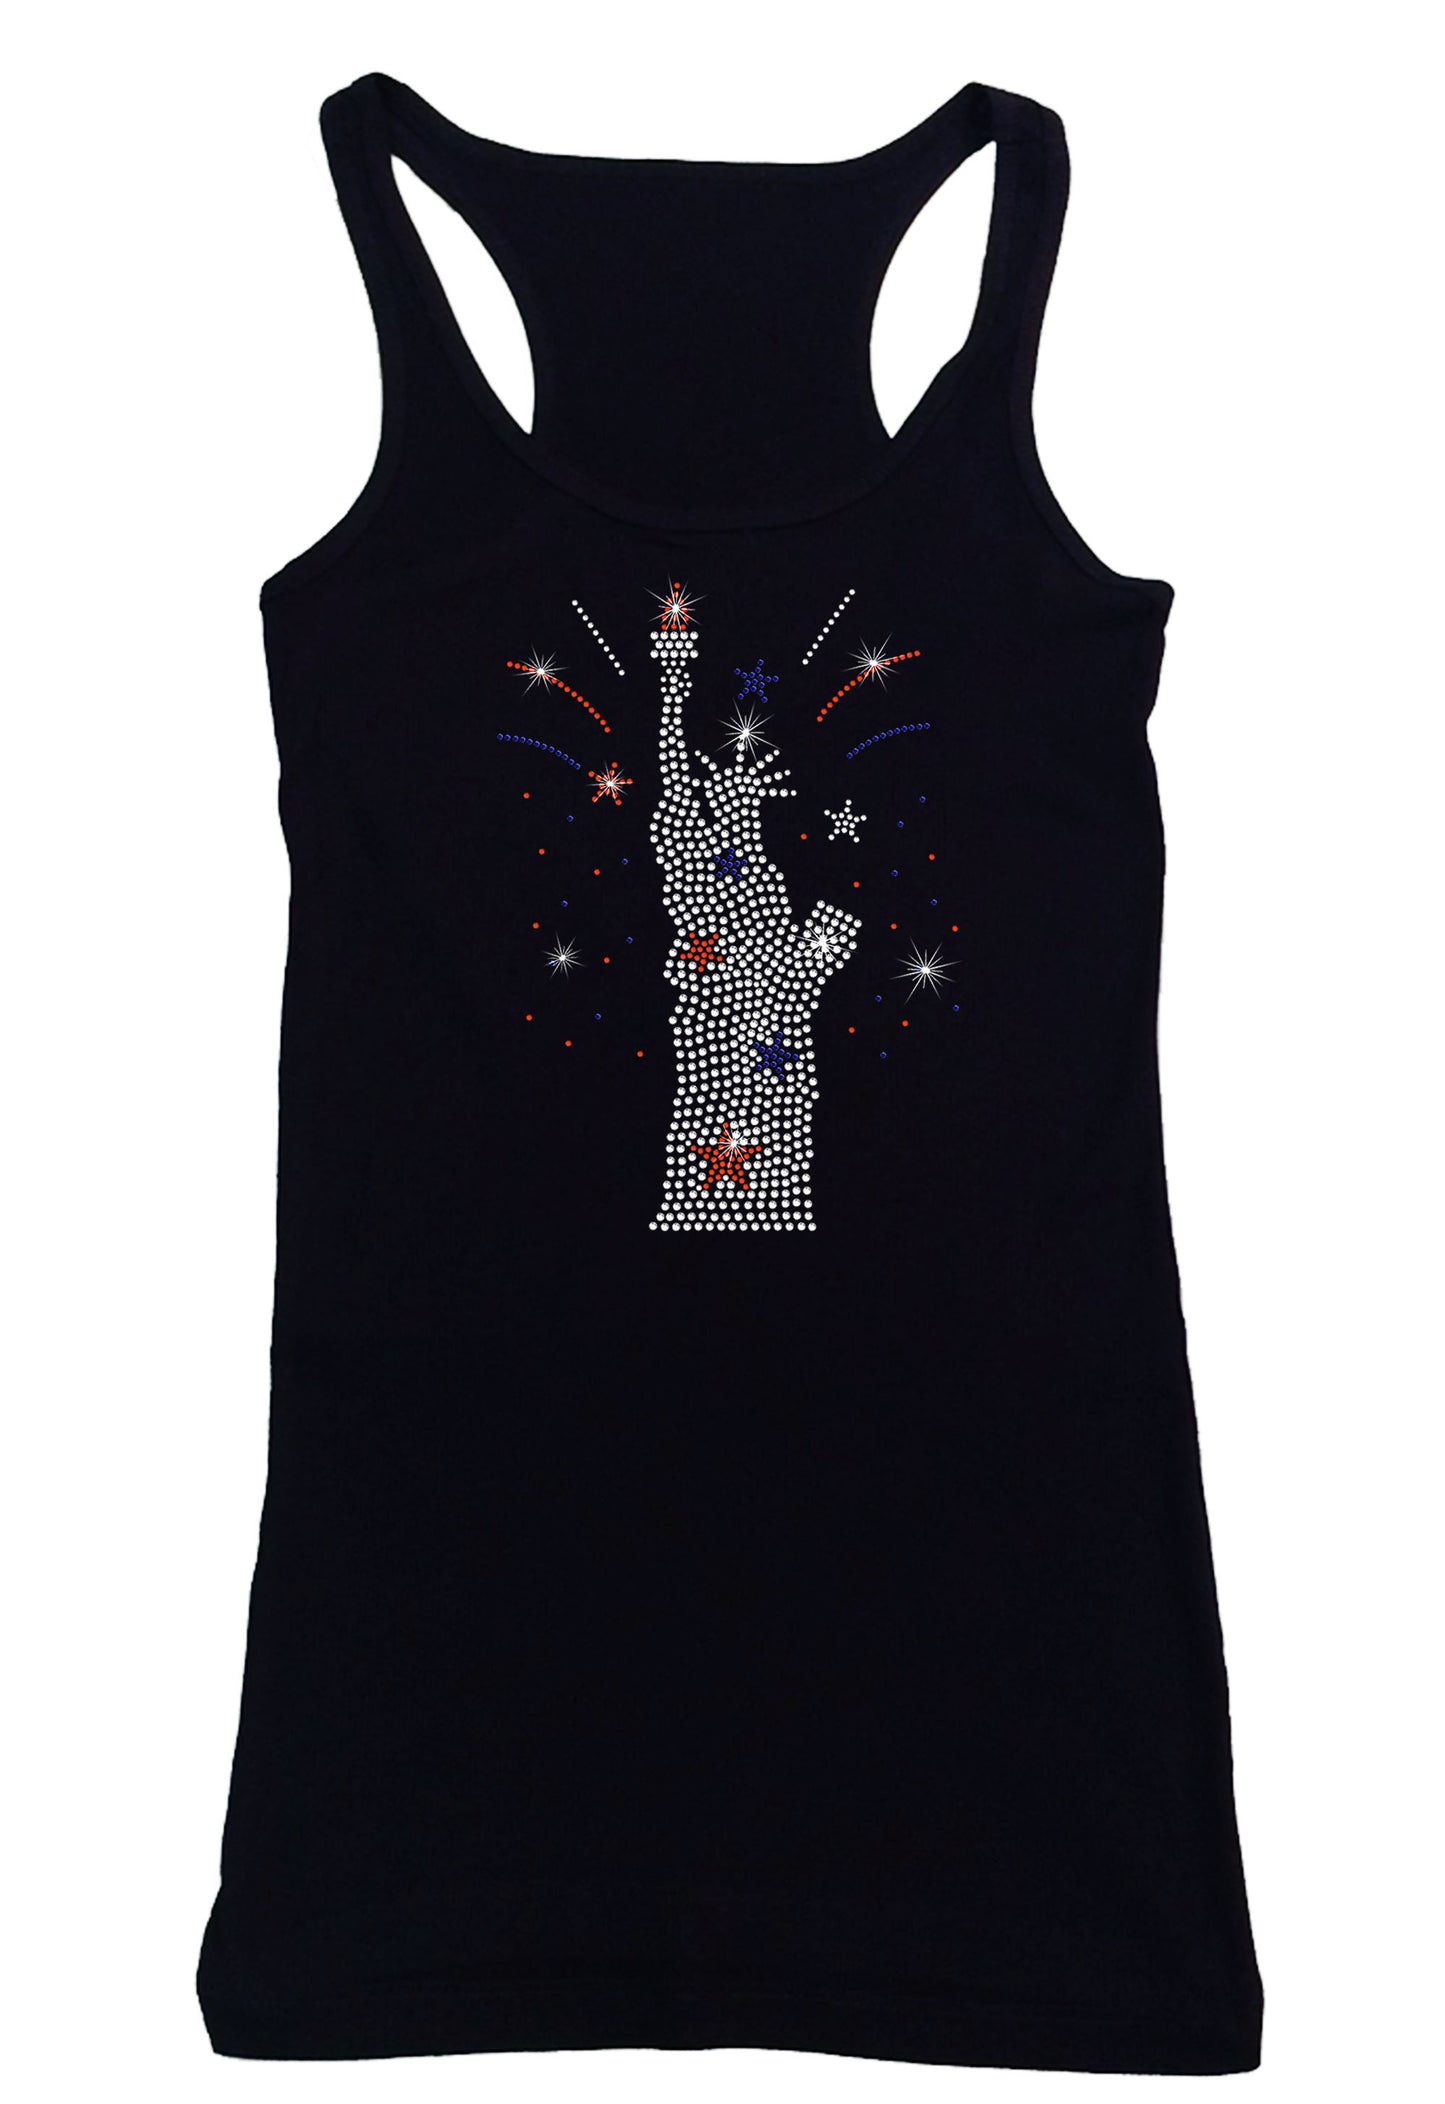 Women's Rhinestone Fitted Tight Snug Shirt Statue of Liberty with Firework Burst in Red, White & Blue, Patriotic Shirt, 4th of July Shirt